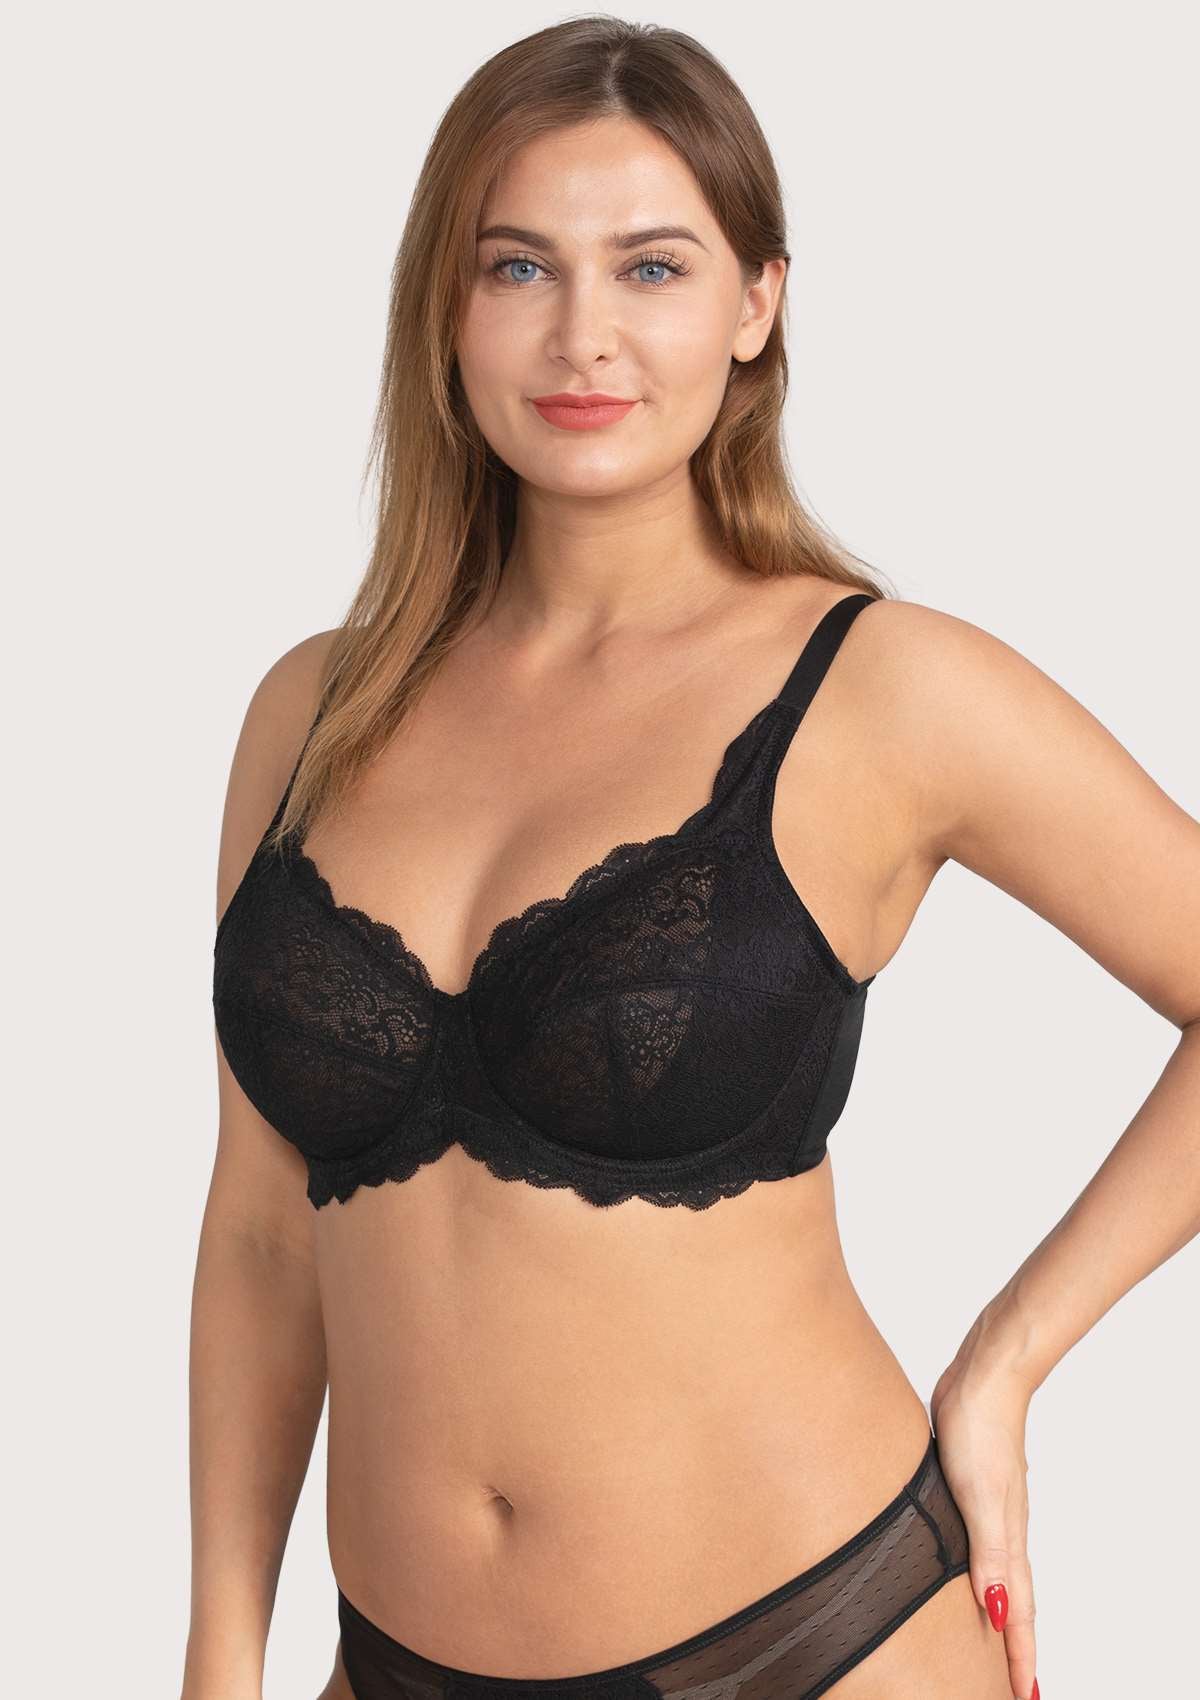 HSIA All-Over Floral Lace Unlined Bra: Minimizer Bra For Heavy Breasts - Black / 34 / D